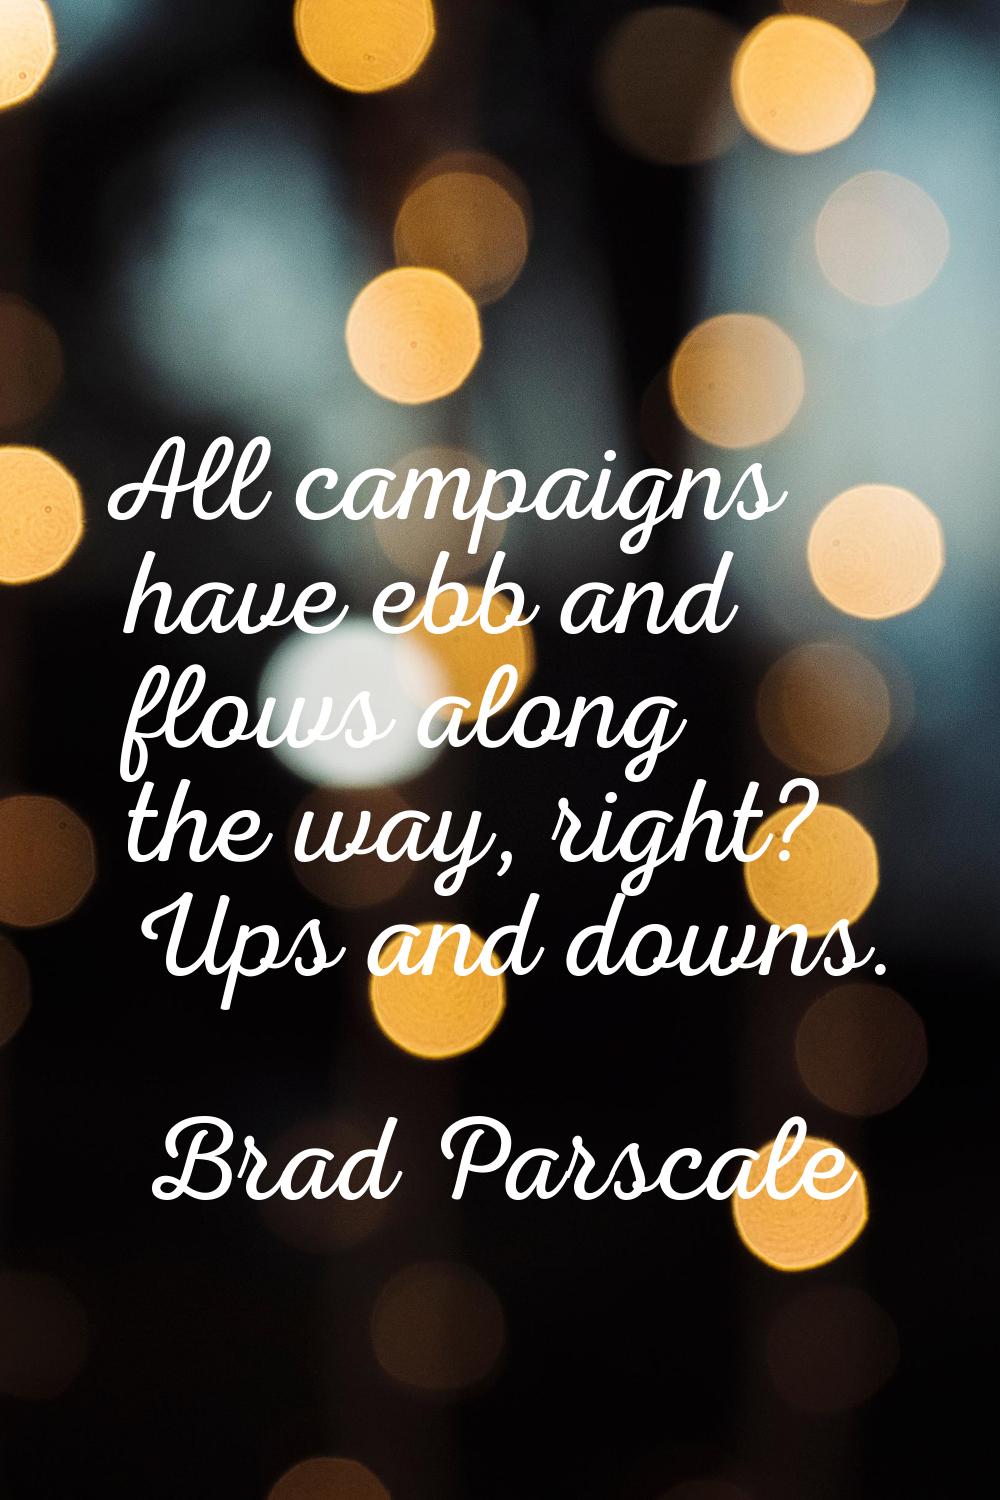 All campaigns have ebb and flows along the way, right? Ups and downs.